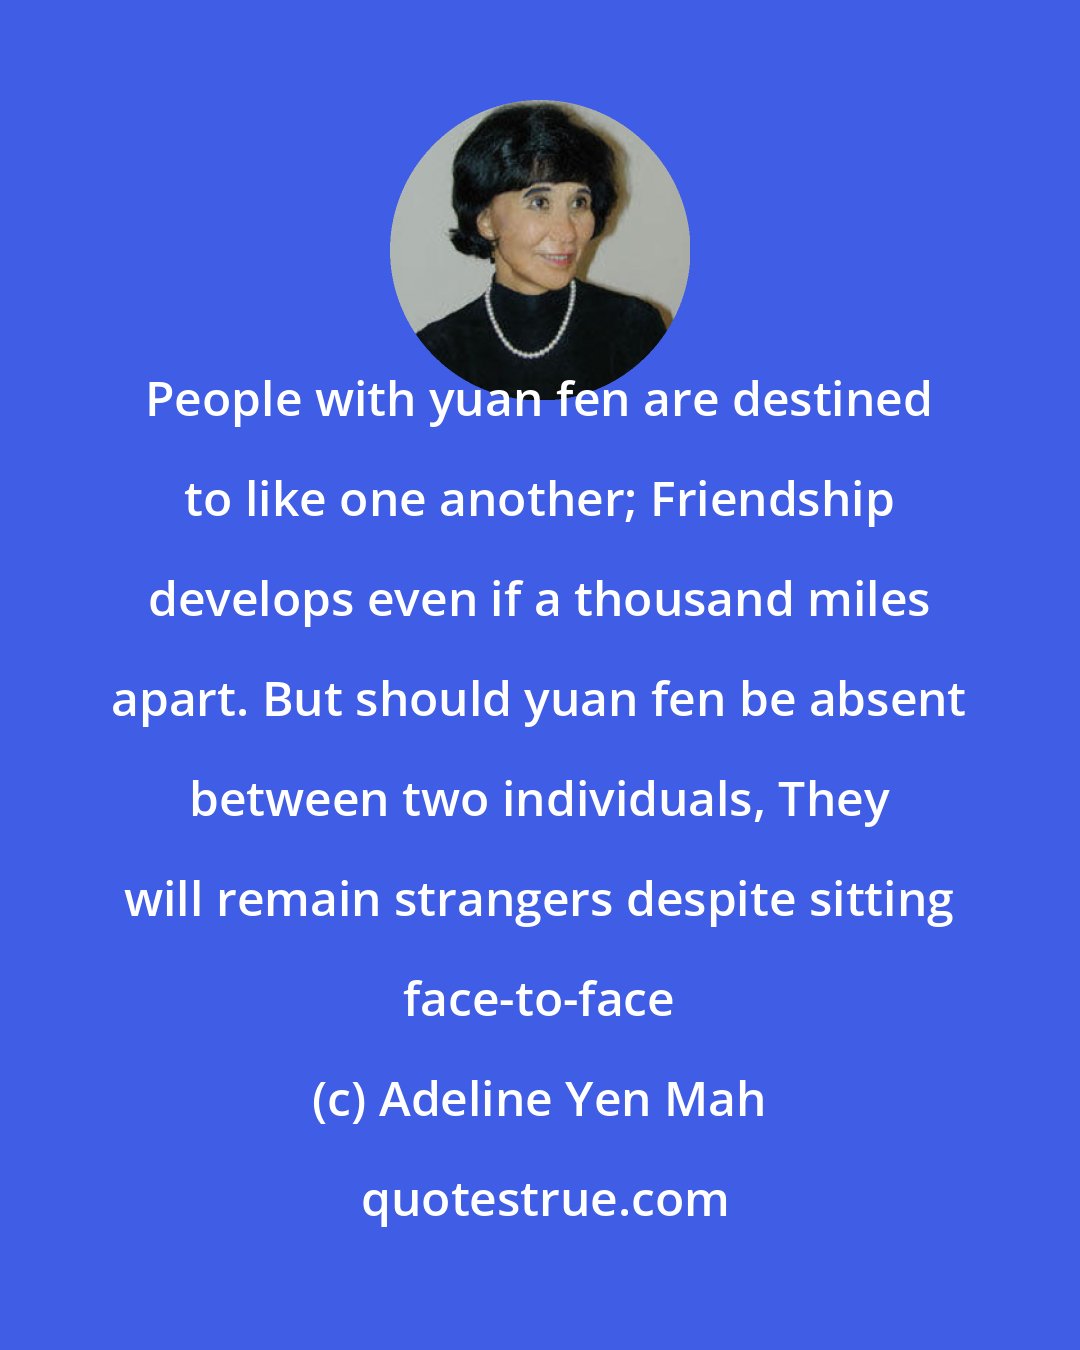 Adeline Yen Mah: People with yuan fen are destined to like one another; Friendship develops even if a thousand miles apart. But should yuan fen be absent between two individuals, They will remain strangers despite sitting face-to-face